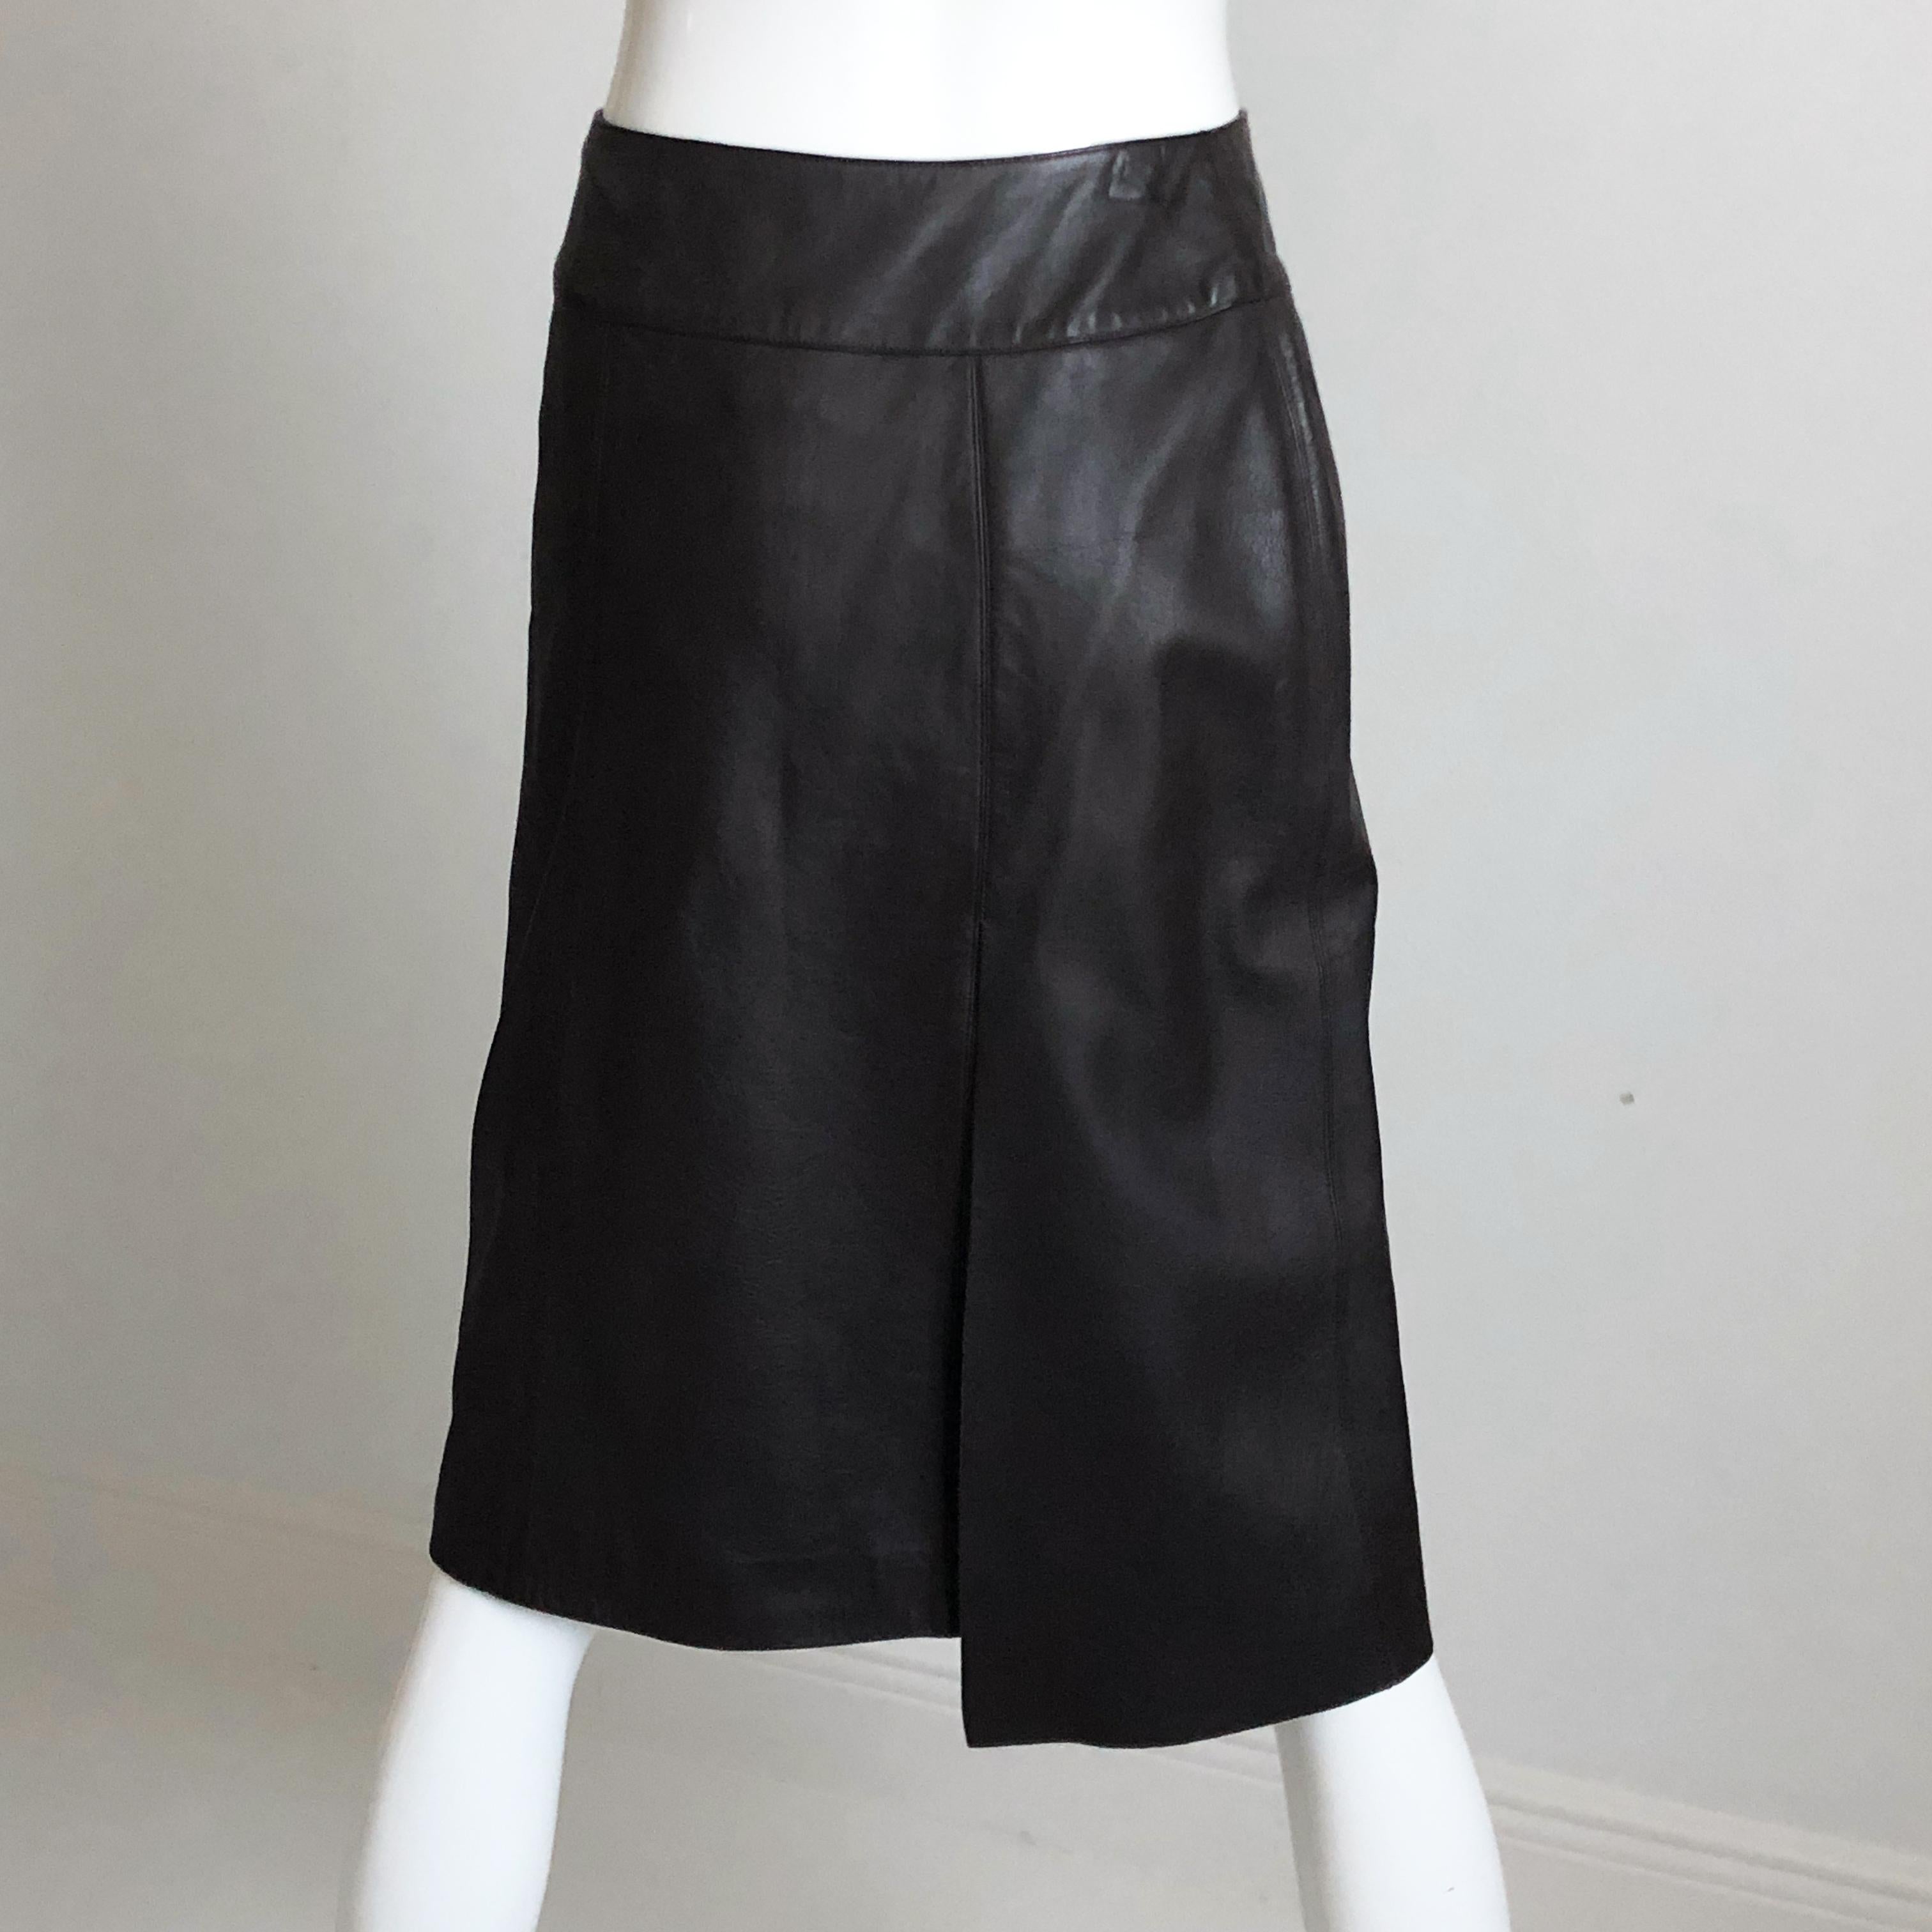 Chanel Skirt Asymmetric Panel Lambskin Leather Mocha Brown 99P Sz 36 In Good Condition For Sale In Port Saint Lucie, FL